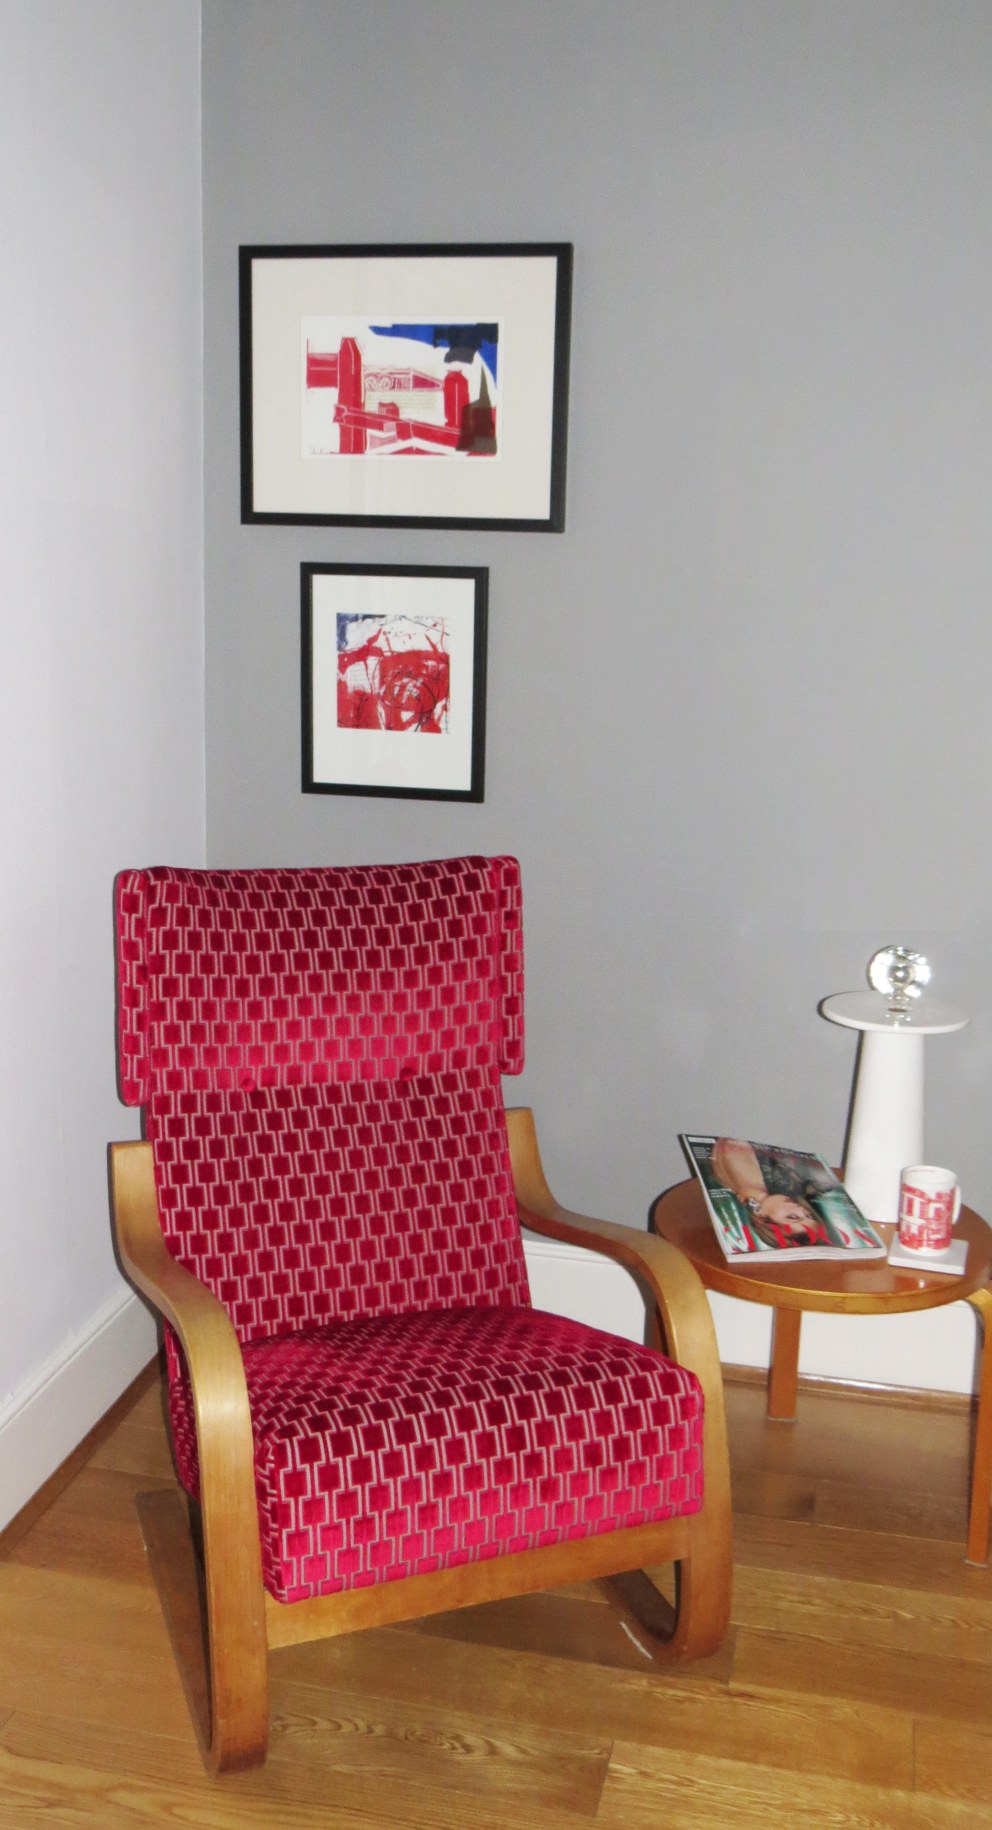 W12 home make-over | Dad's corner went from a worn out cluttered area to a vibrant focal point  | Interior Designers